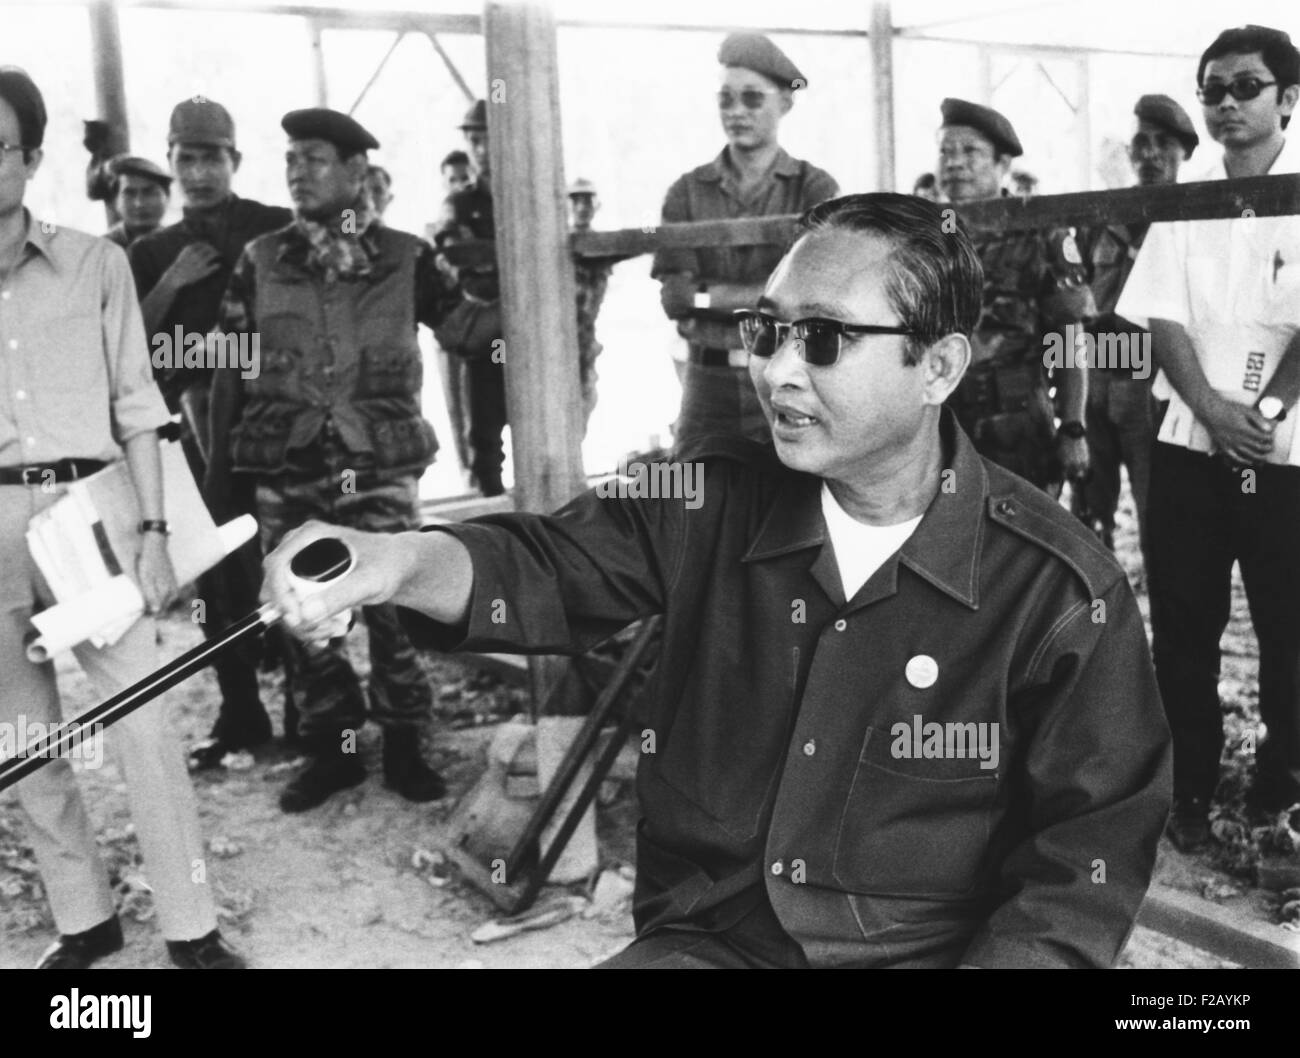 Cambodian Prime Minister Lon Nol at a press conference in Phnom Penh, on March 6, 1972. Lon Nol, dissolved the National Assembly and assumed dictatorial power. On March 10, 1972 he took the title of President of the Khmer Republic. (CSU 2015 9 764) Stock Photo